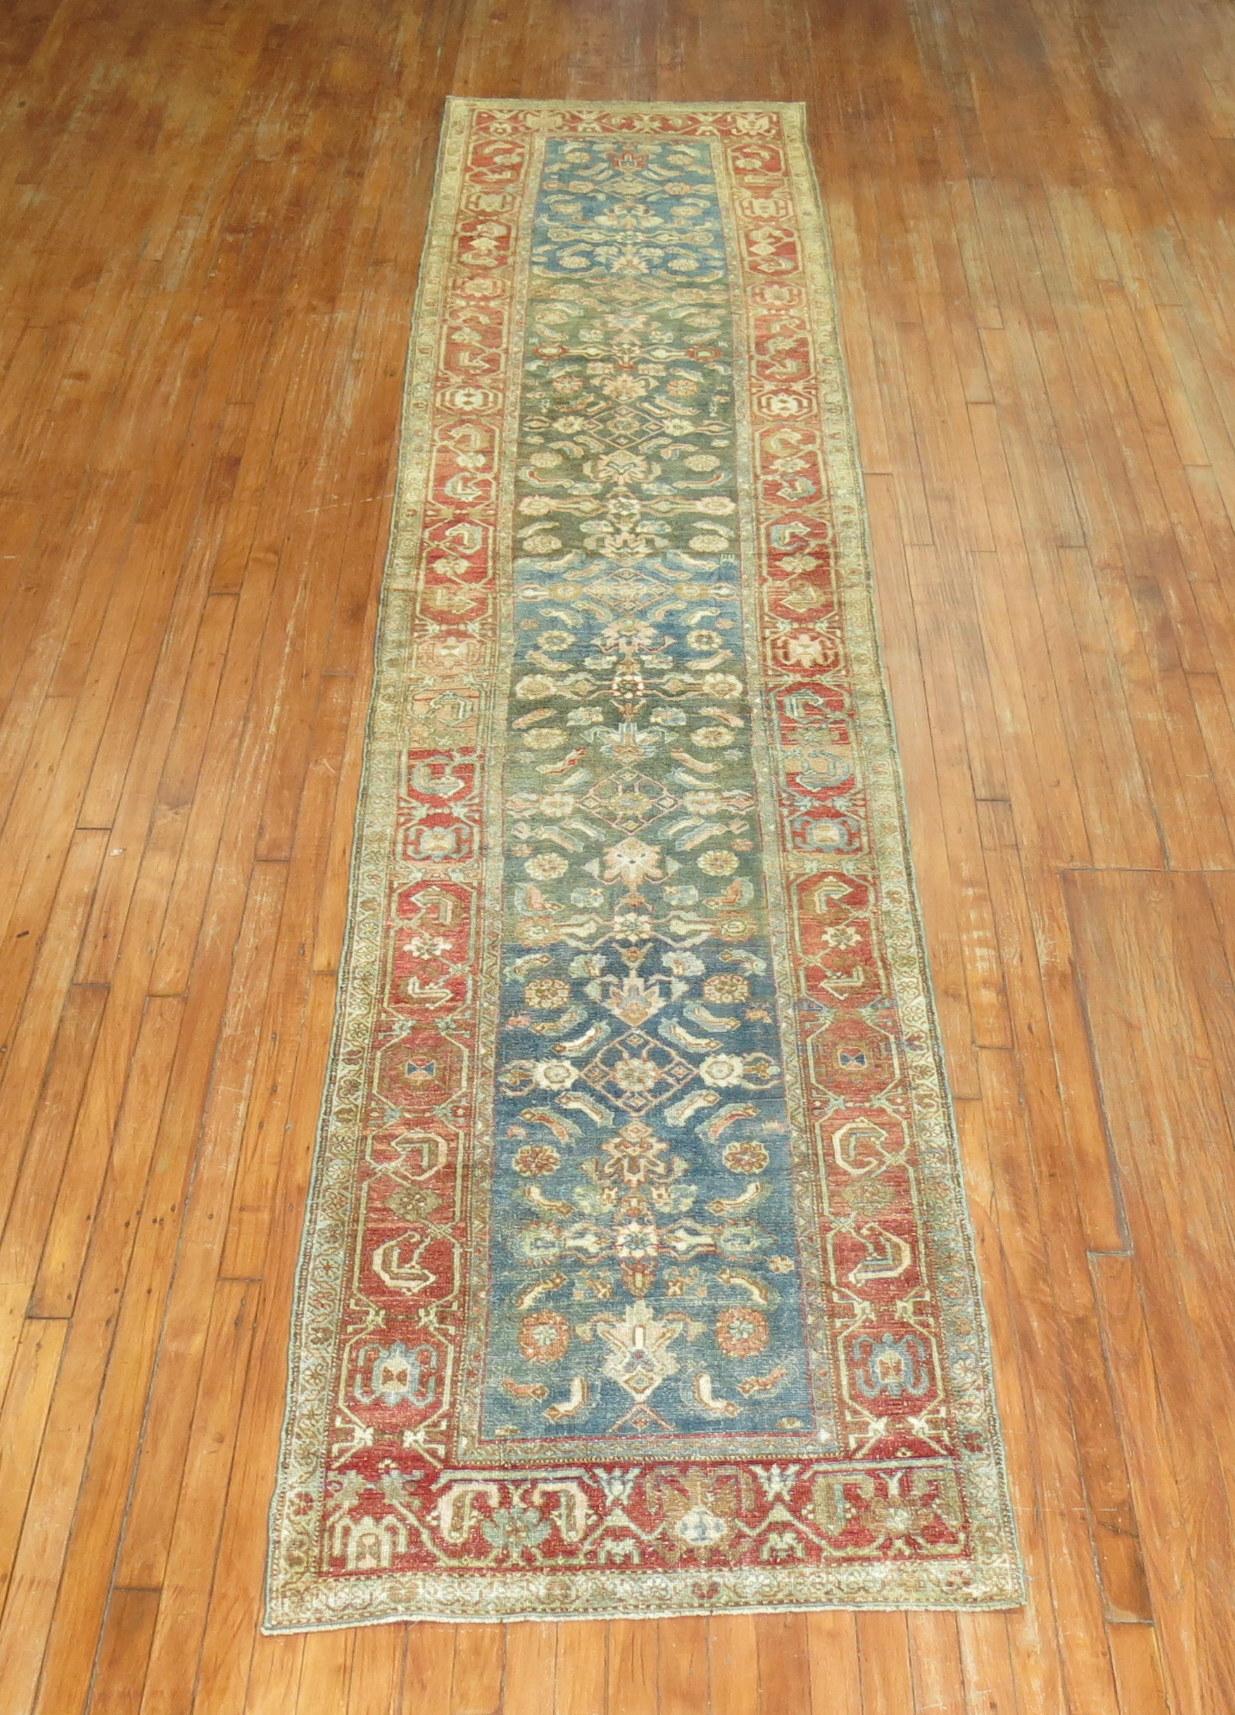 Persian Malayer runner from the early 20th century. 

Measures: 2'11